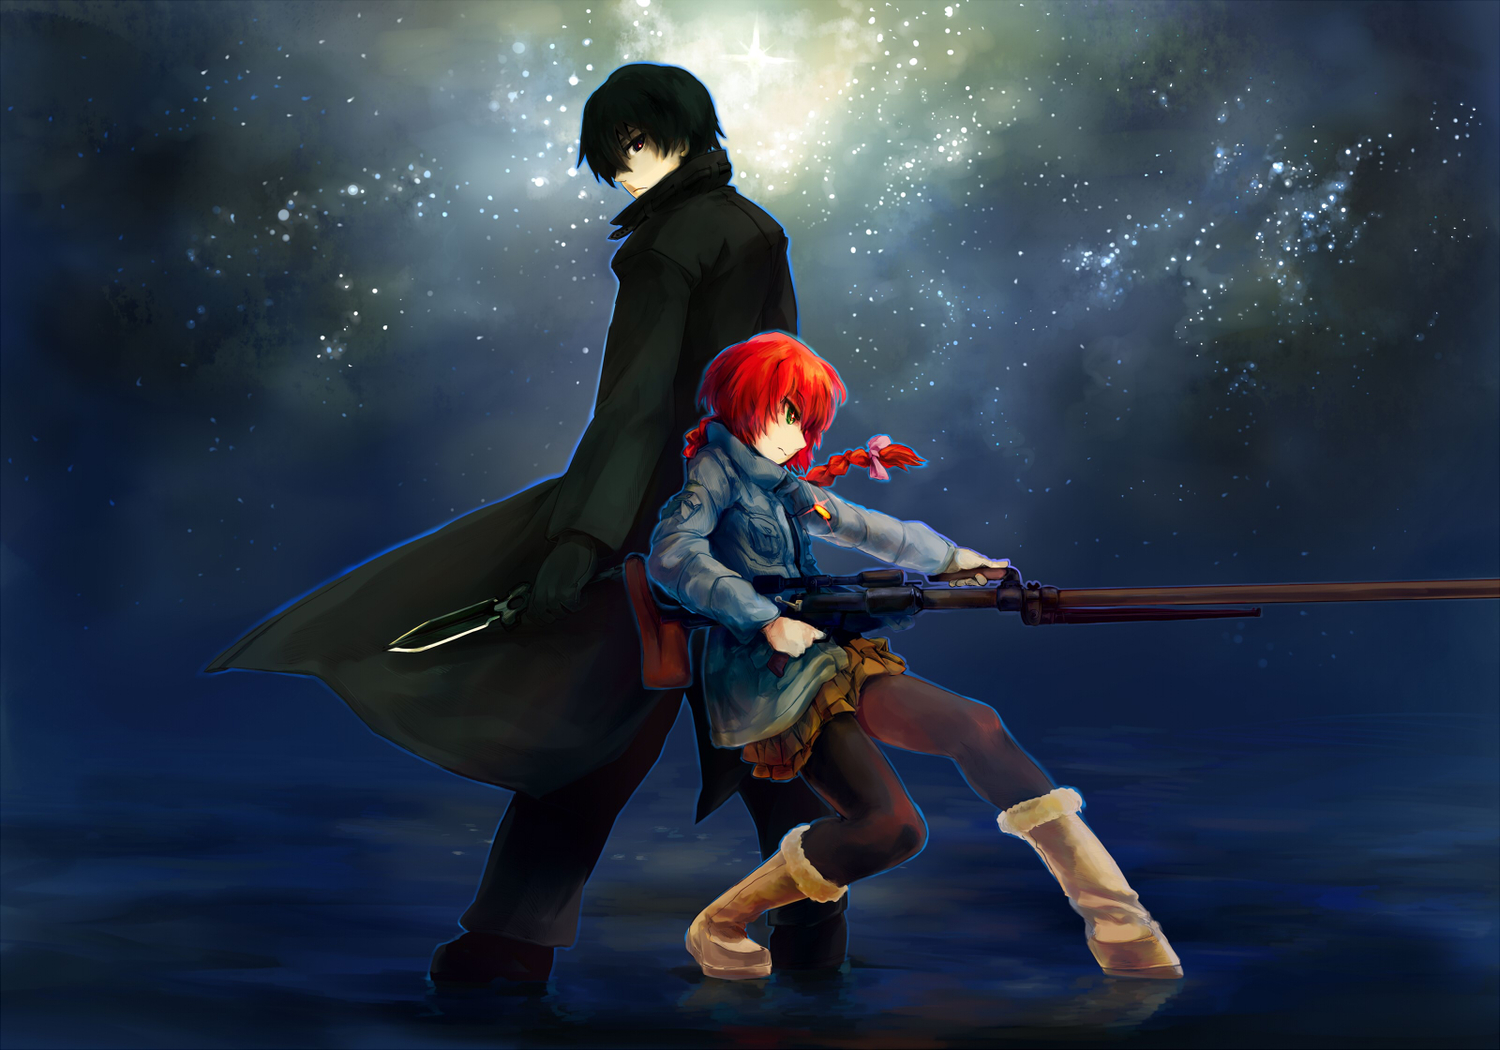 Hei & Suou from the anime Darker than Black, a dynamic duo with powerful abilities.